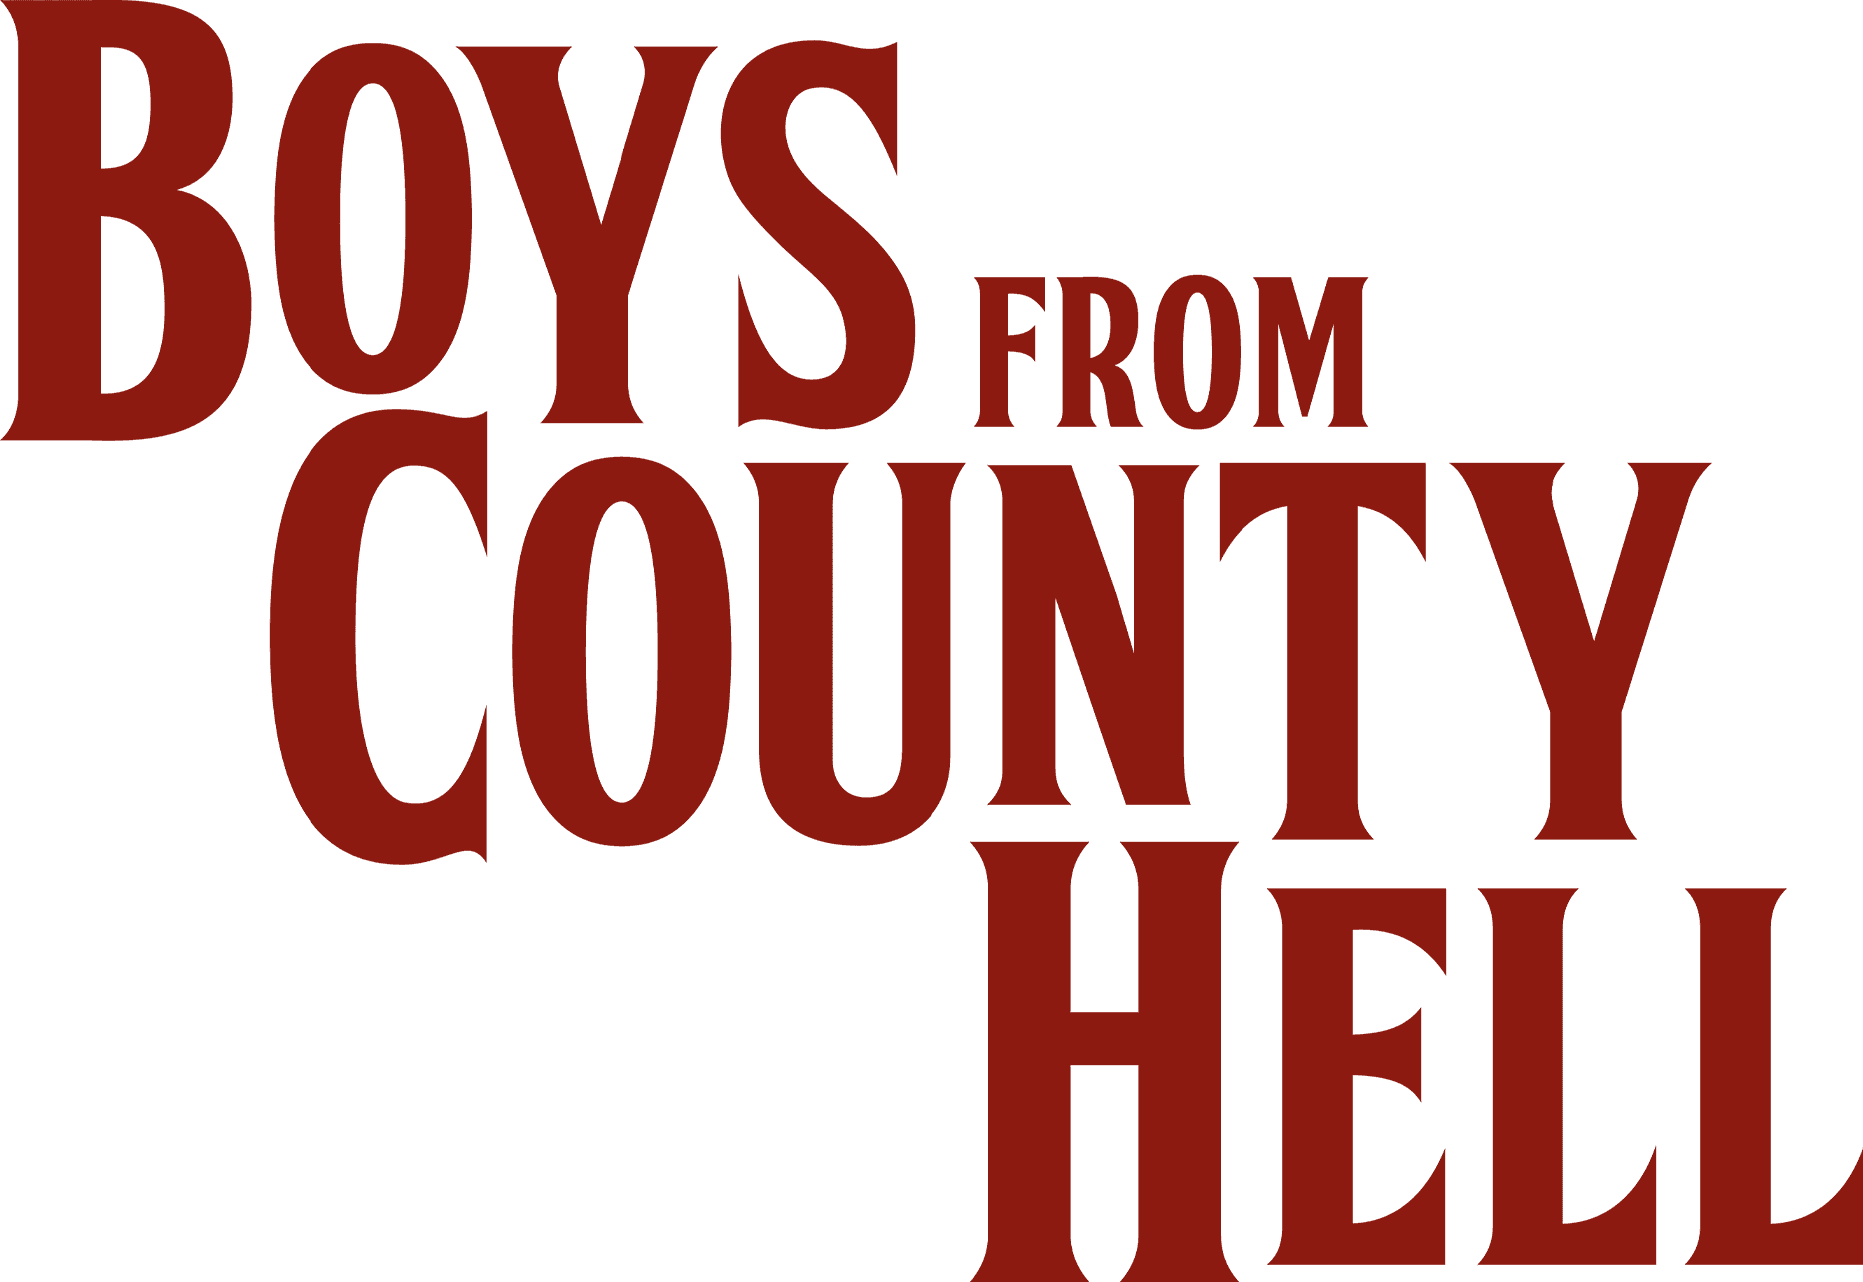 Boys from County Hell logo